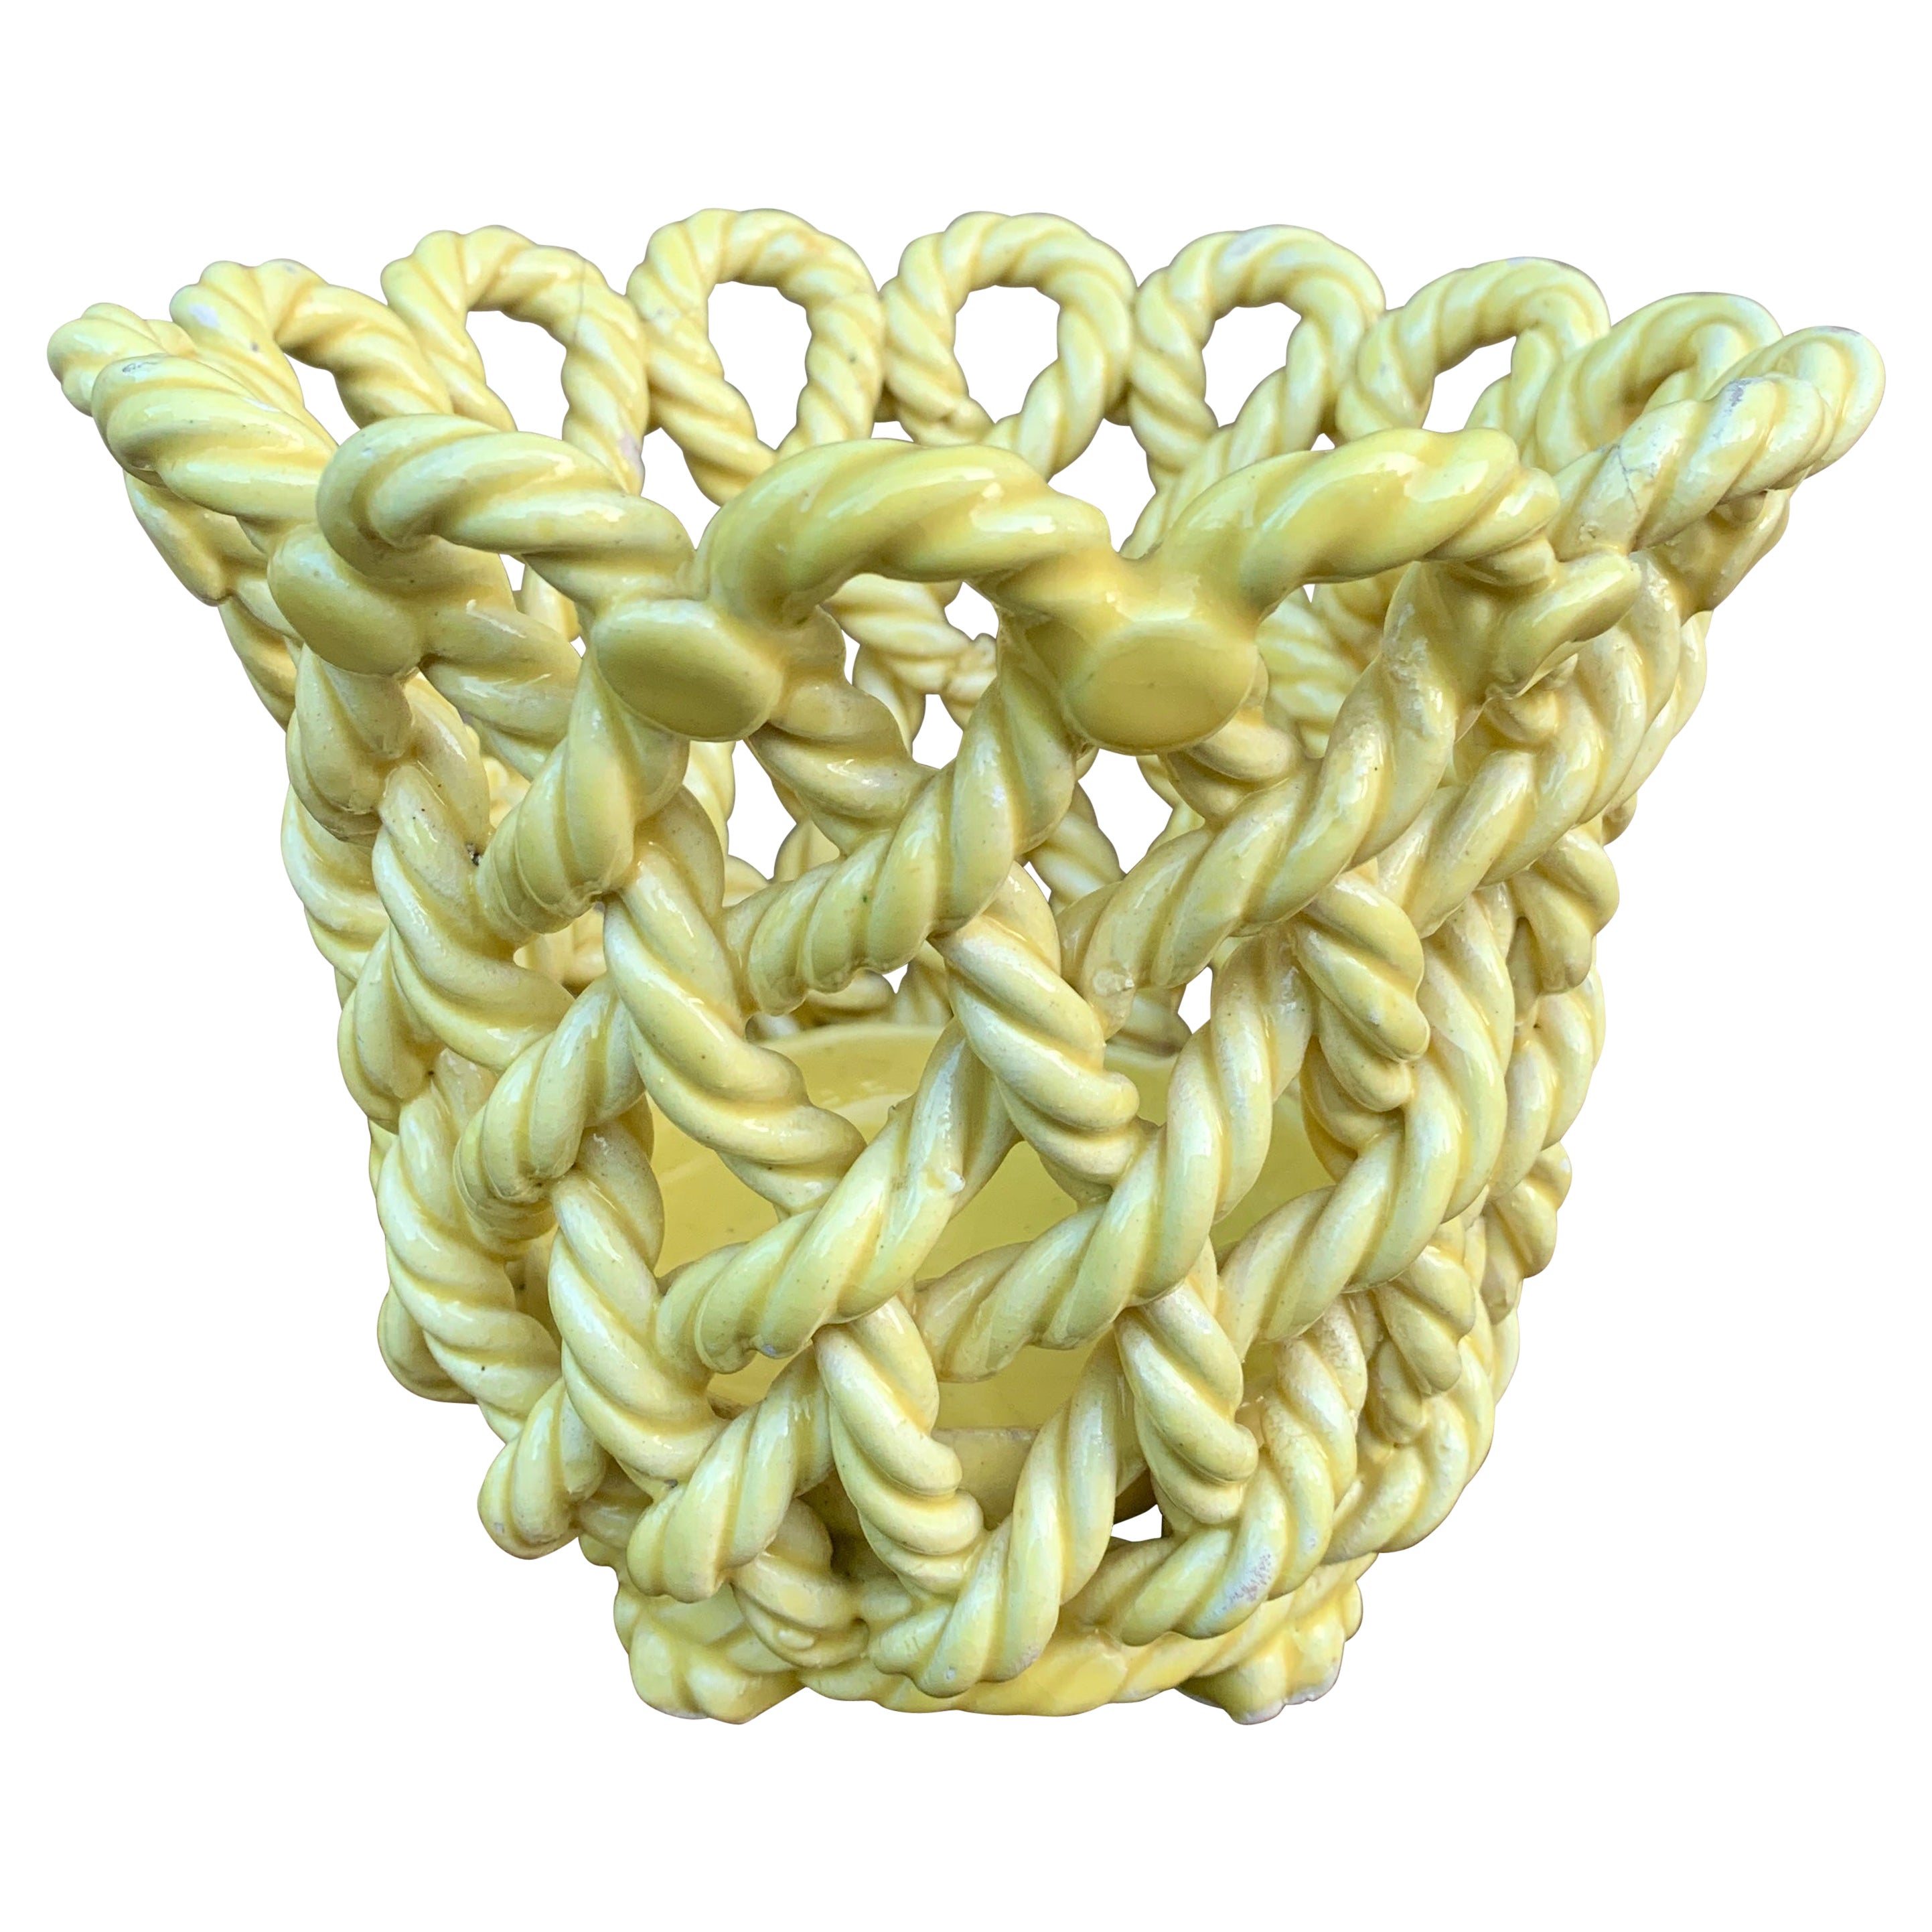 French Country Yellow Ceramic Woven Rope Cachepot Basket